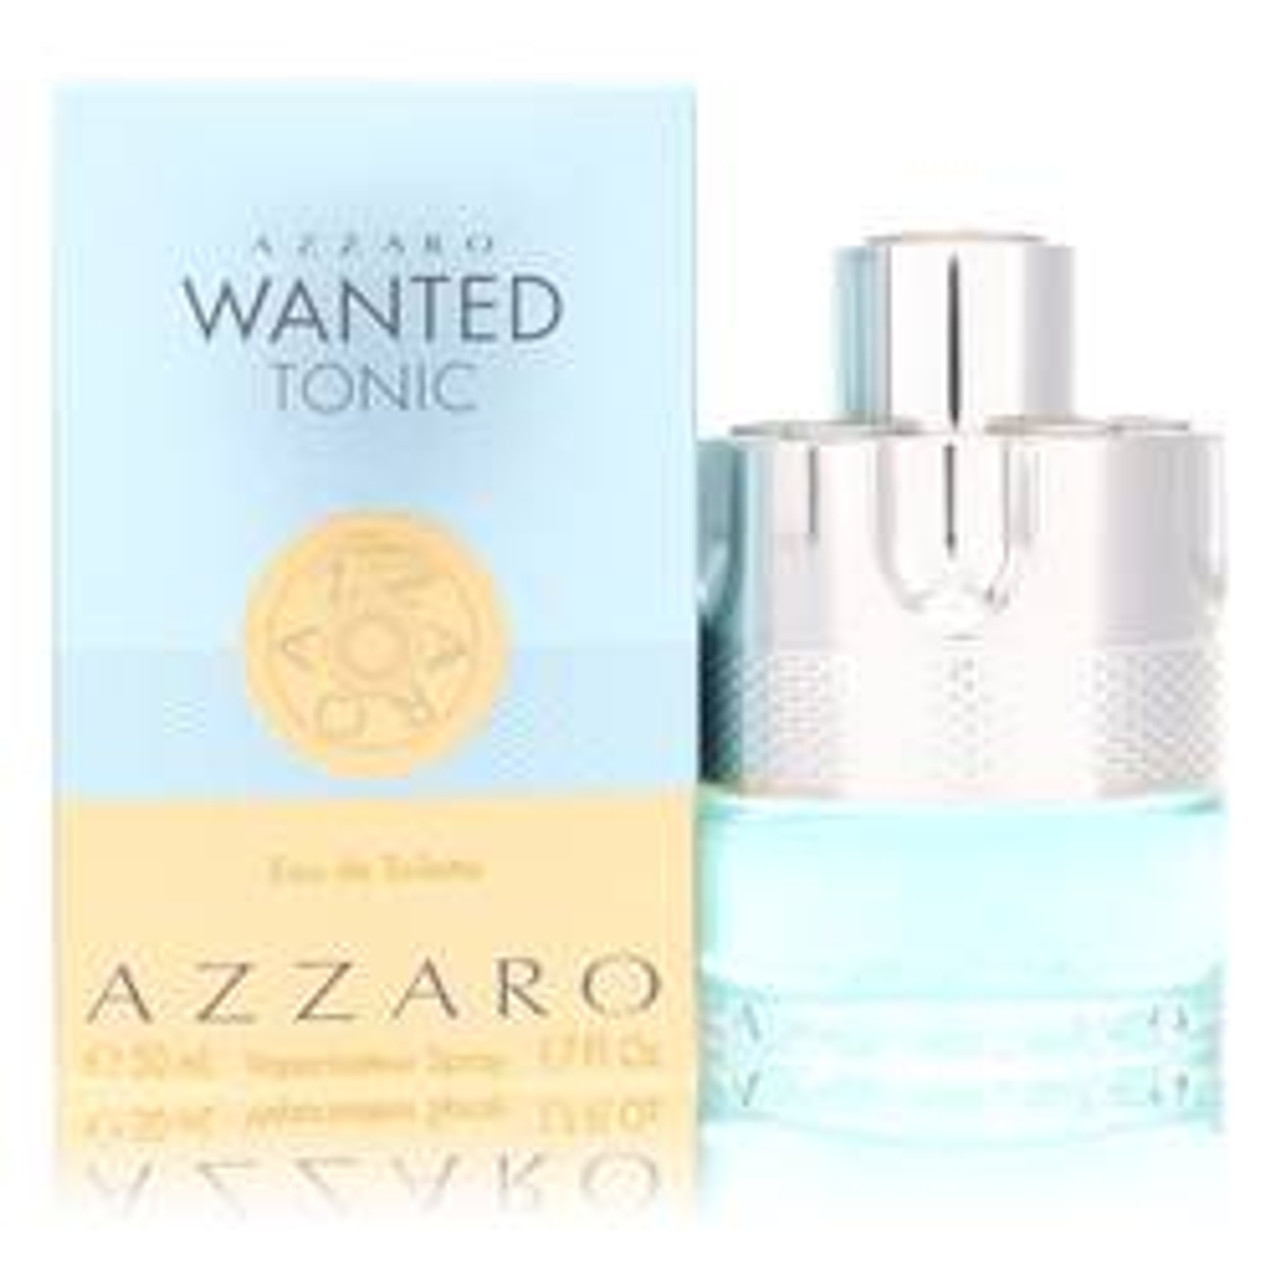 Azzaro Wanted Tonic Cologne By Azzaro Eau De Toilette Spray 1.7 oz for Men - [From 63.00 - Choose pk Qty ] - *Ships from Miami